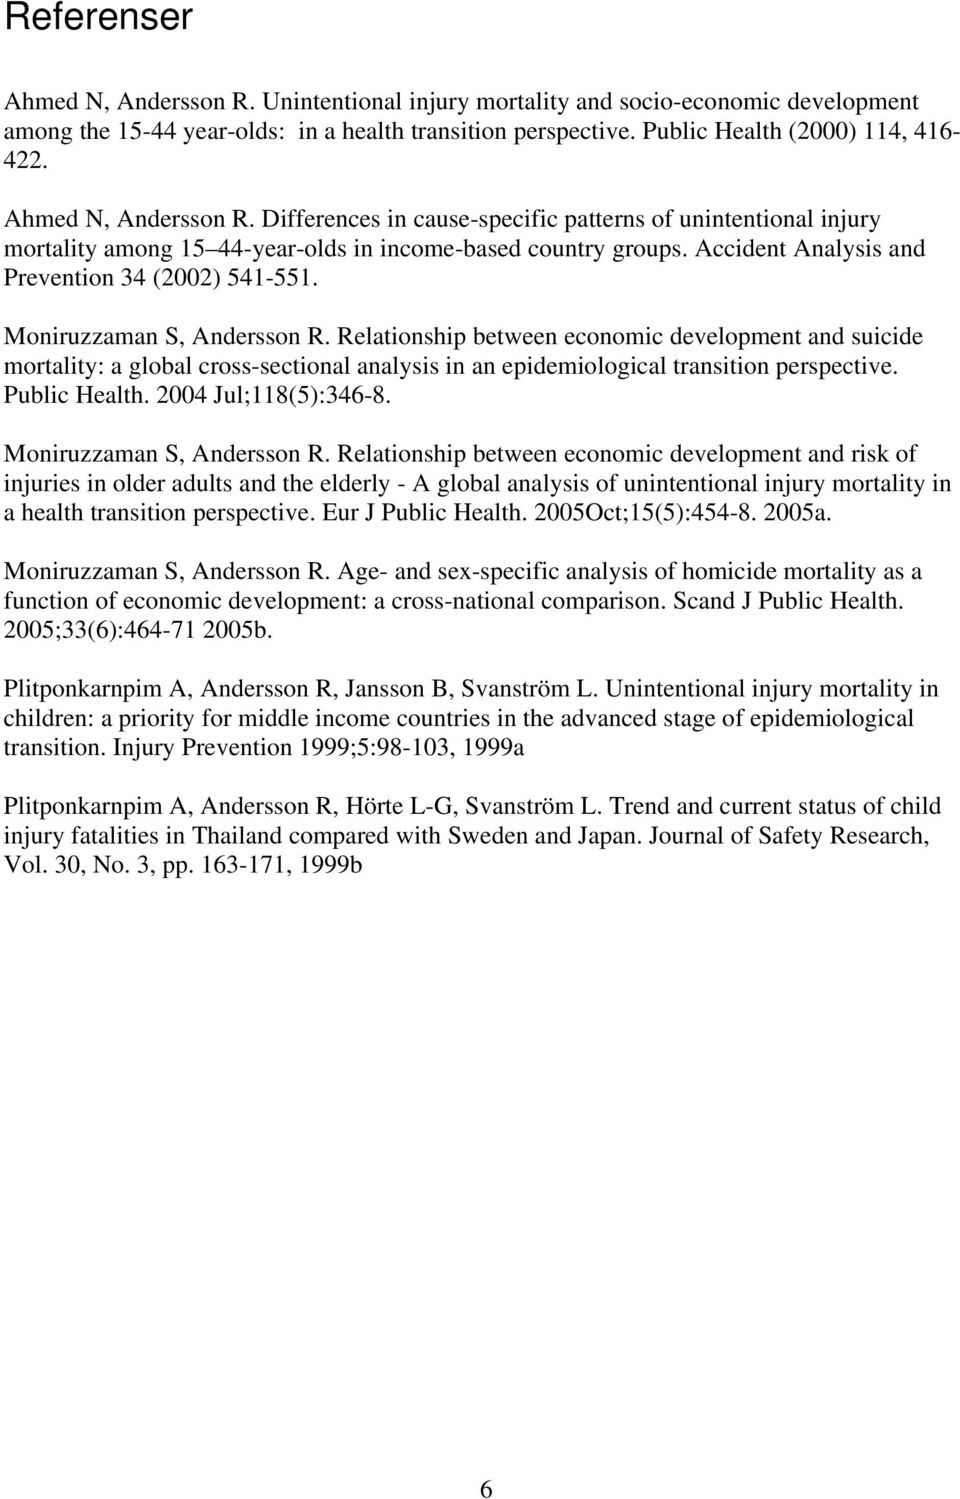 Moniruzzaman S, Andersson R. Relationship between economic development and suicide mortality: a global cross-sectional analysis in an epidemiological transition perspective. Public Health.